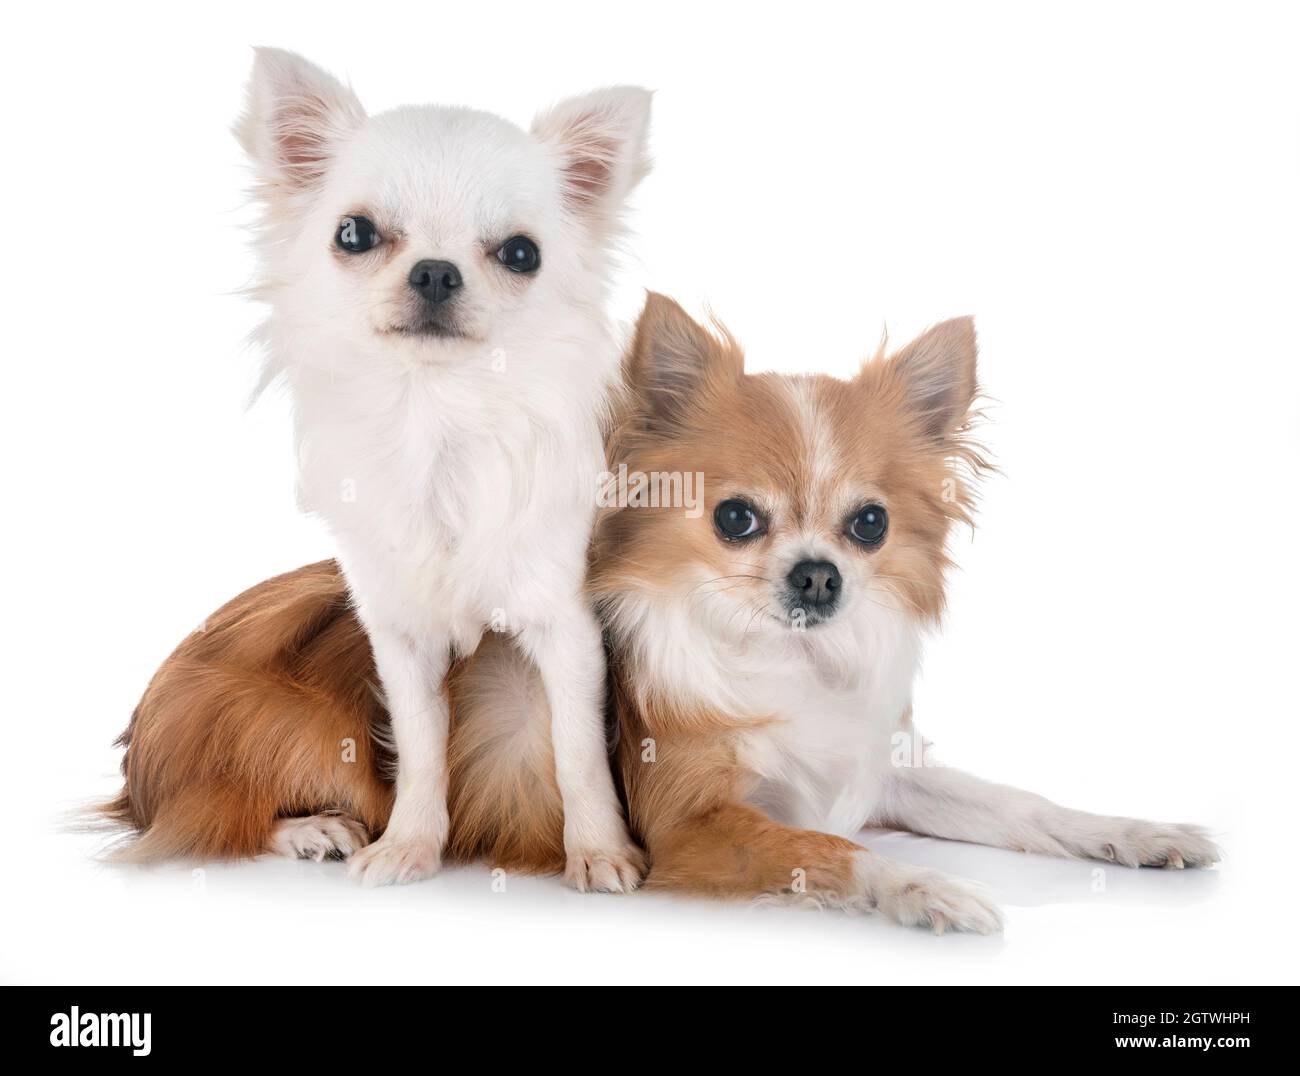 Dogs Against White Background Stock Photo